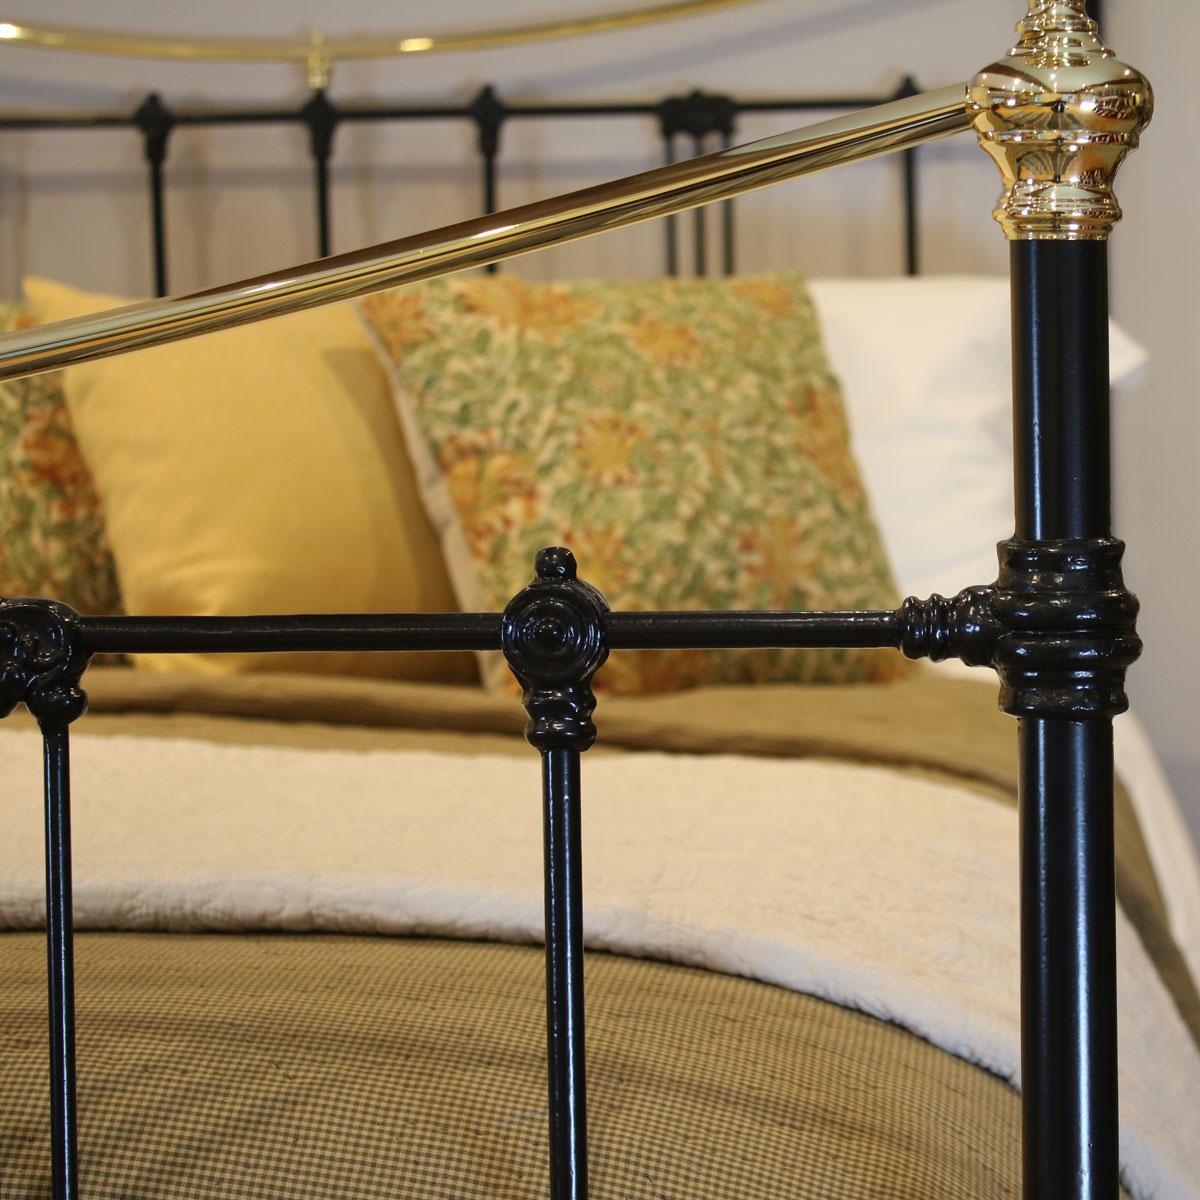 brass and iron beds for sale